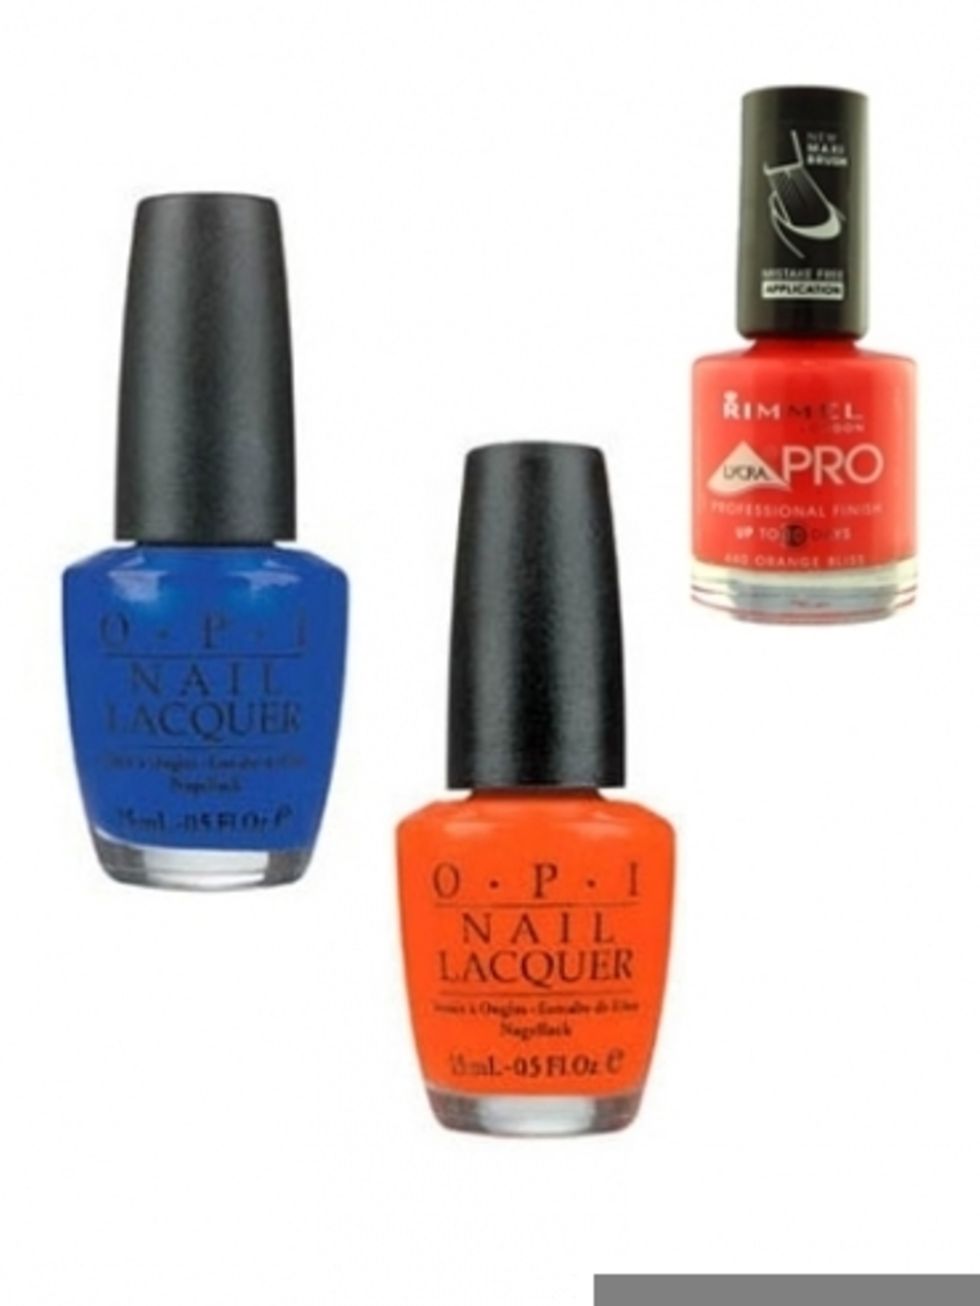 Liquid, Blue, Brown, Product, Orange, Red, Pink, Cosmetics, Peach, Tints and shades, 